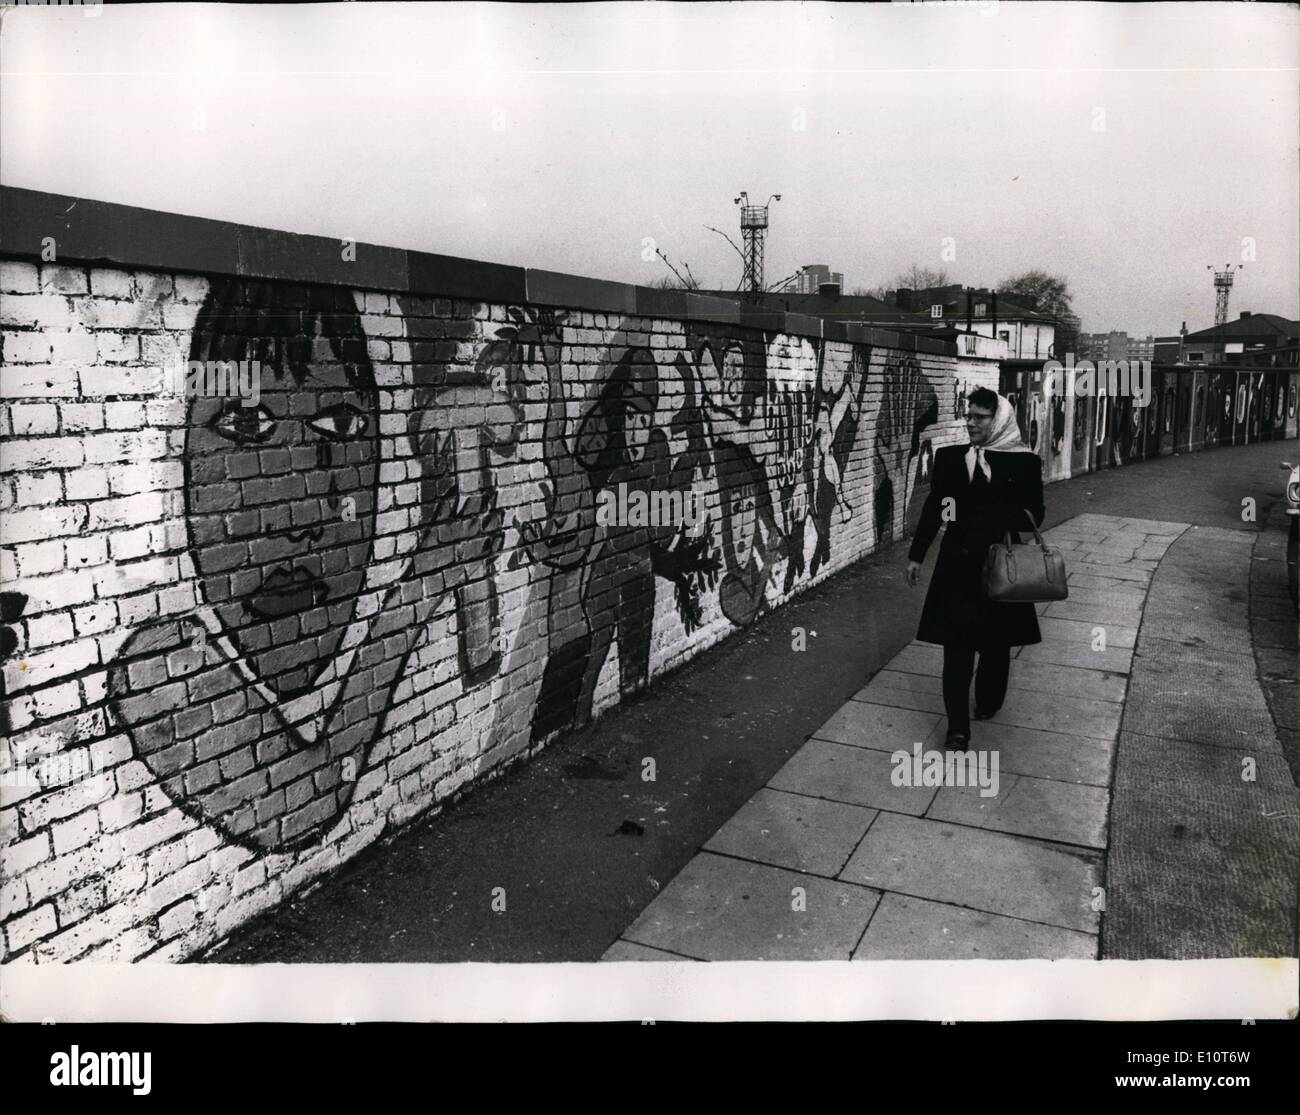 Mar. 03, 1974 - Wall Painting inspired by events in Chile. This wall painting by the Fine Hearts Brigade in King Henry's Road, Chalk Form, London, was inspired by recent events in Chile. The painting includes an exhibition of photographs and posters at the Tuo Congress House. Stock Photo